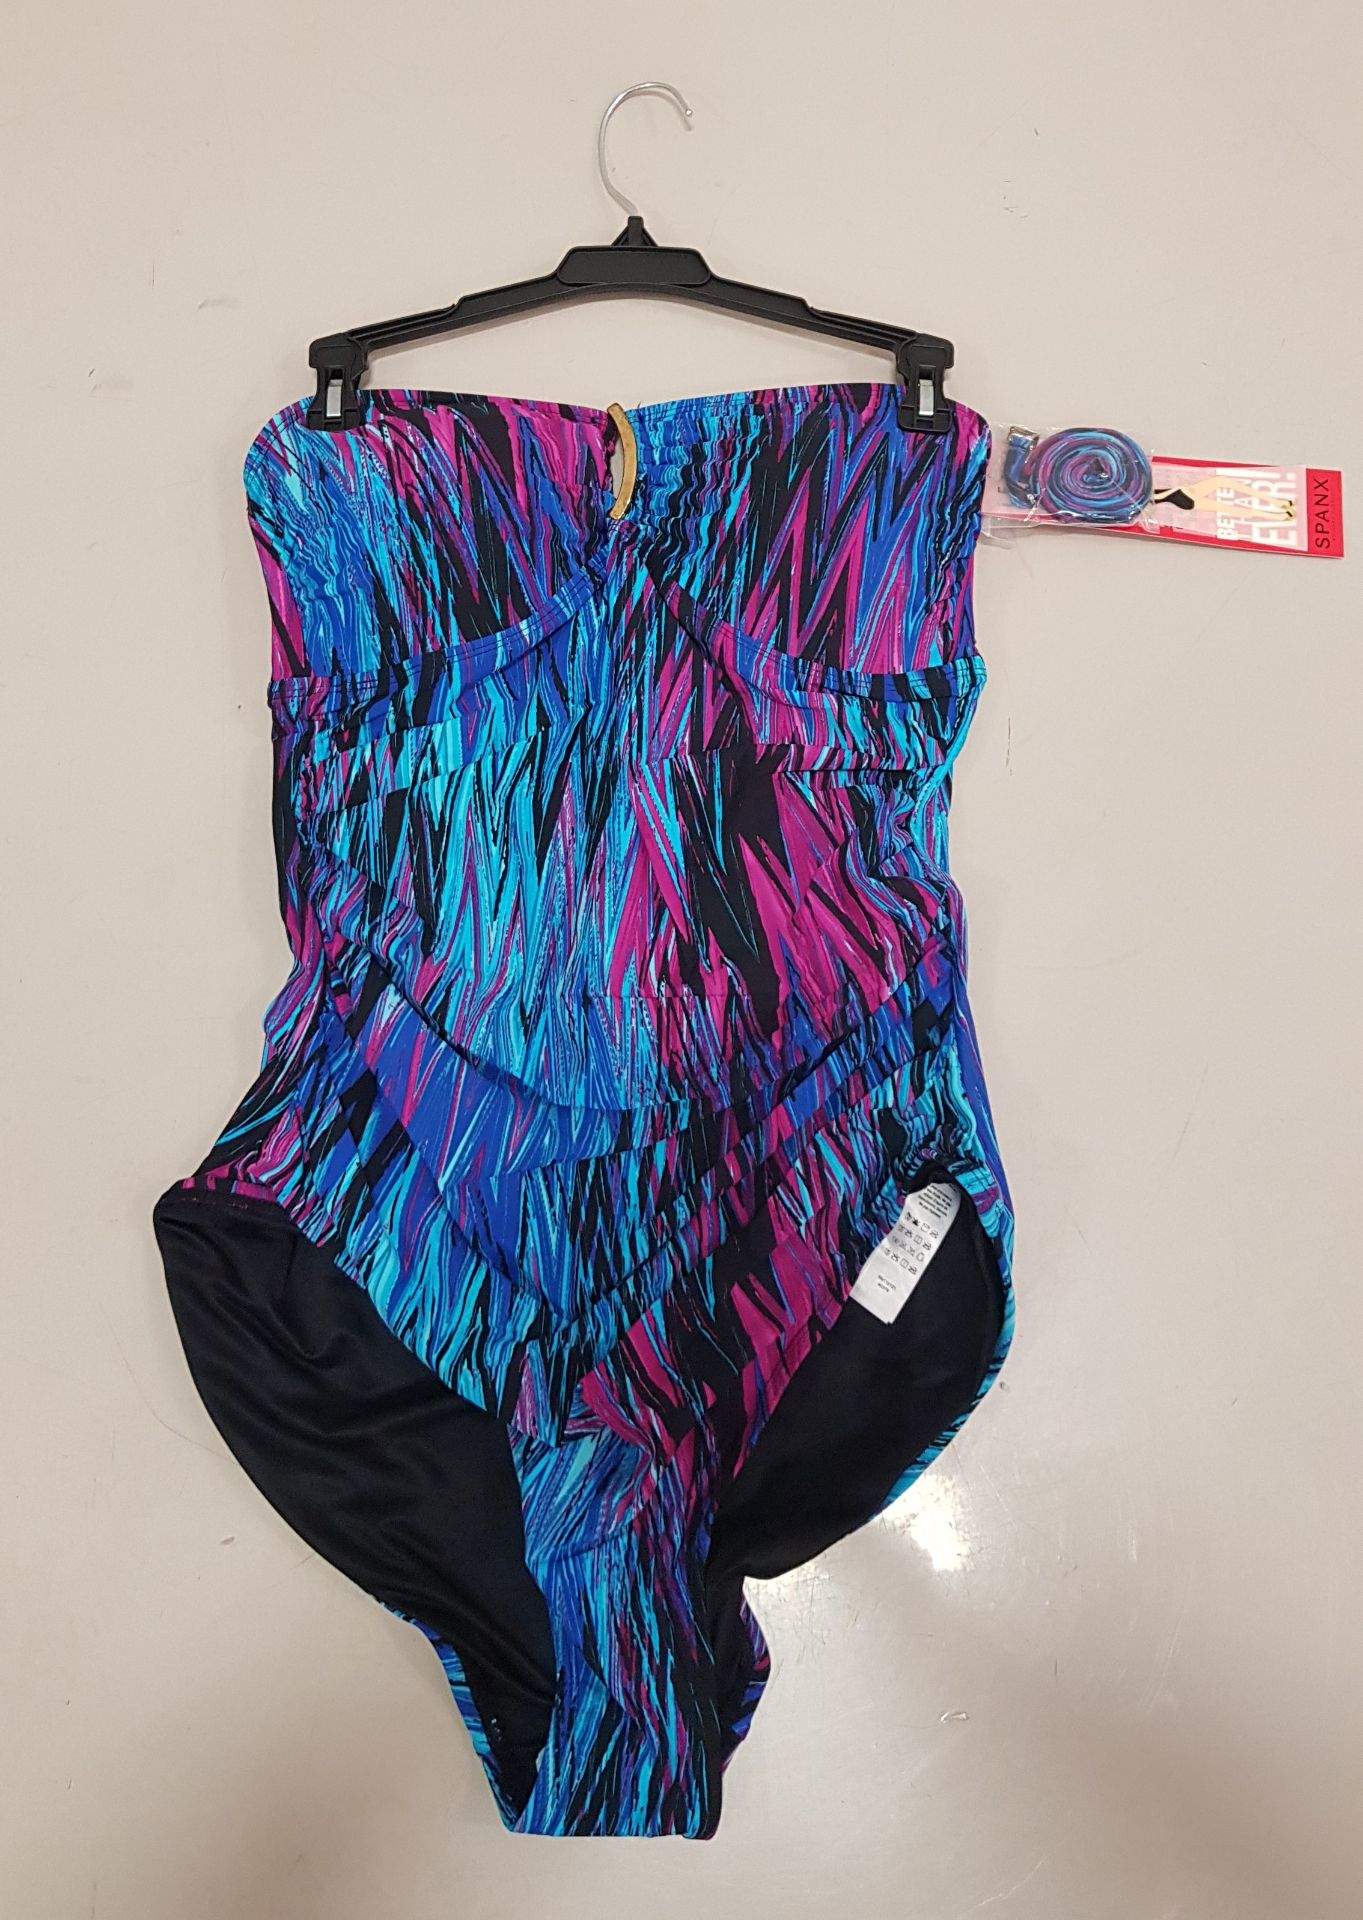 7 X BRAND NEW SPANX ONE PIECE BODYSUIT IN WAVE LENGHT STYLE AND BLUE/PURPLE IN COLOUR ALL IN (SIZE